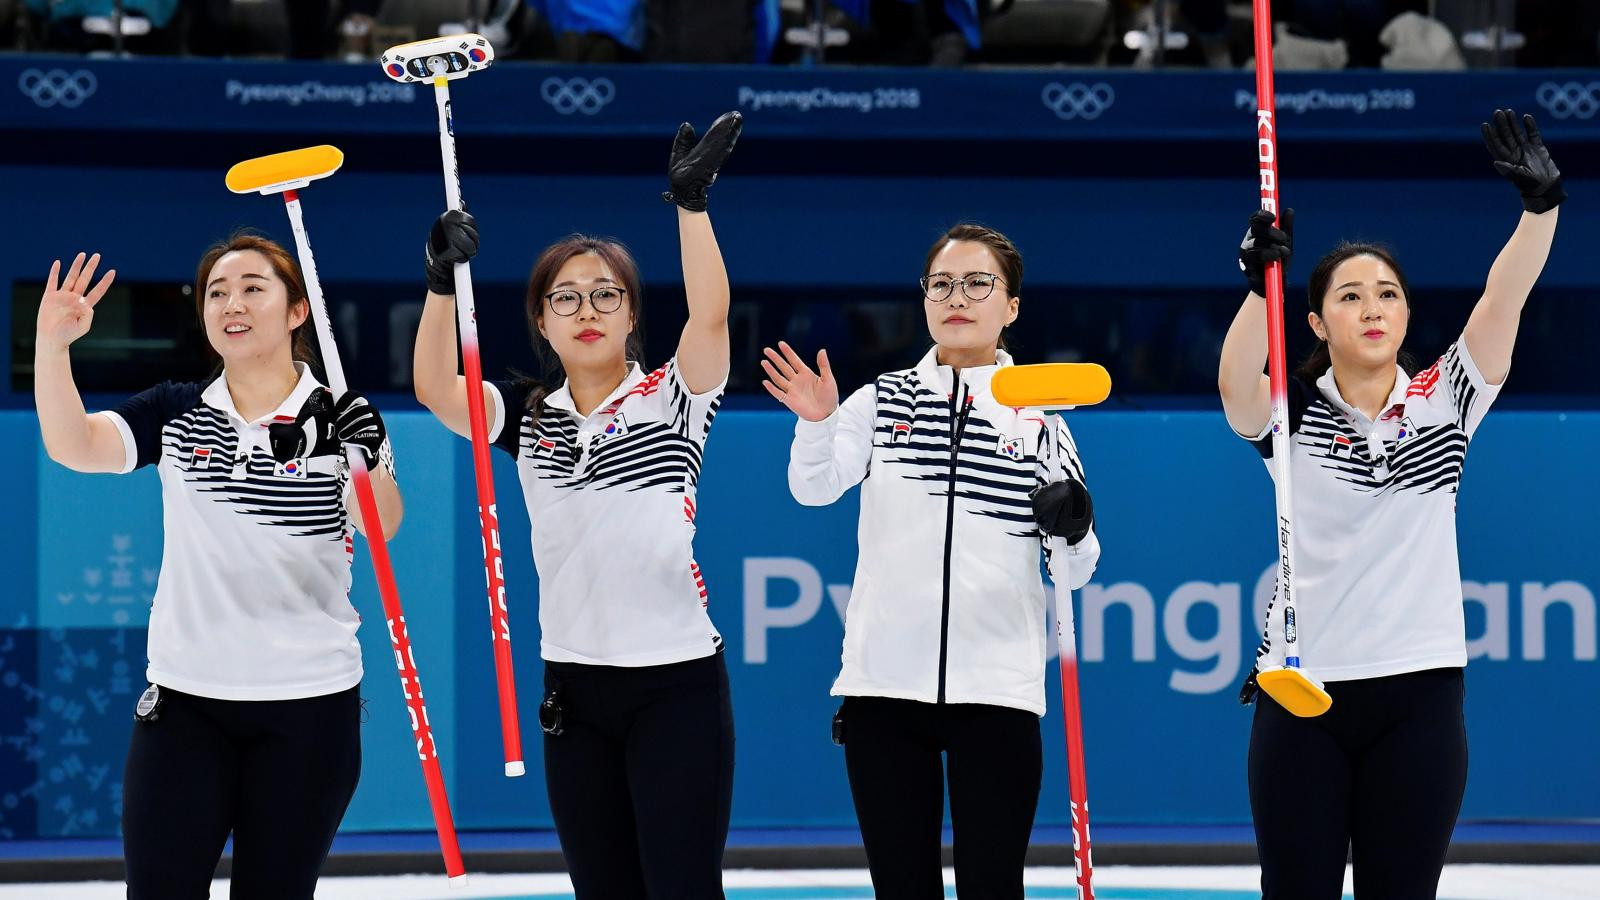 The South Korean team that won the Olympic silver medals at Pyeongchang 2018 are due to take part in the South Korea-China-Japan Women’s Curling Competition now set to go ahead without a representative from Japan ©Getty Images